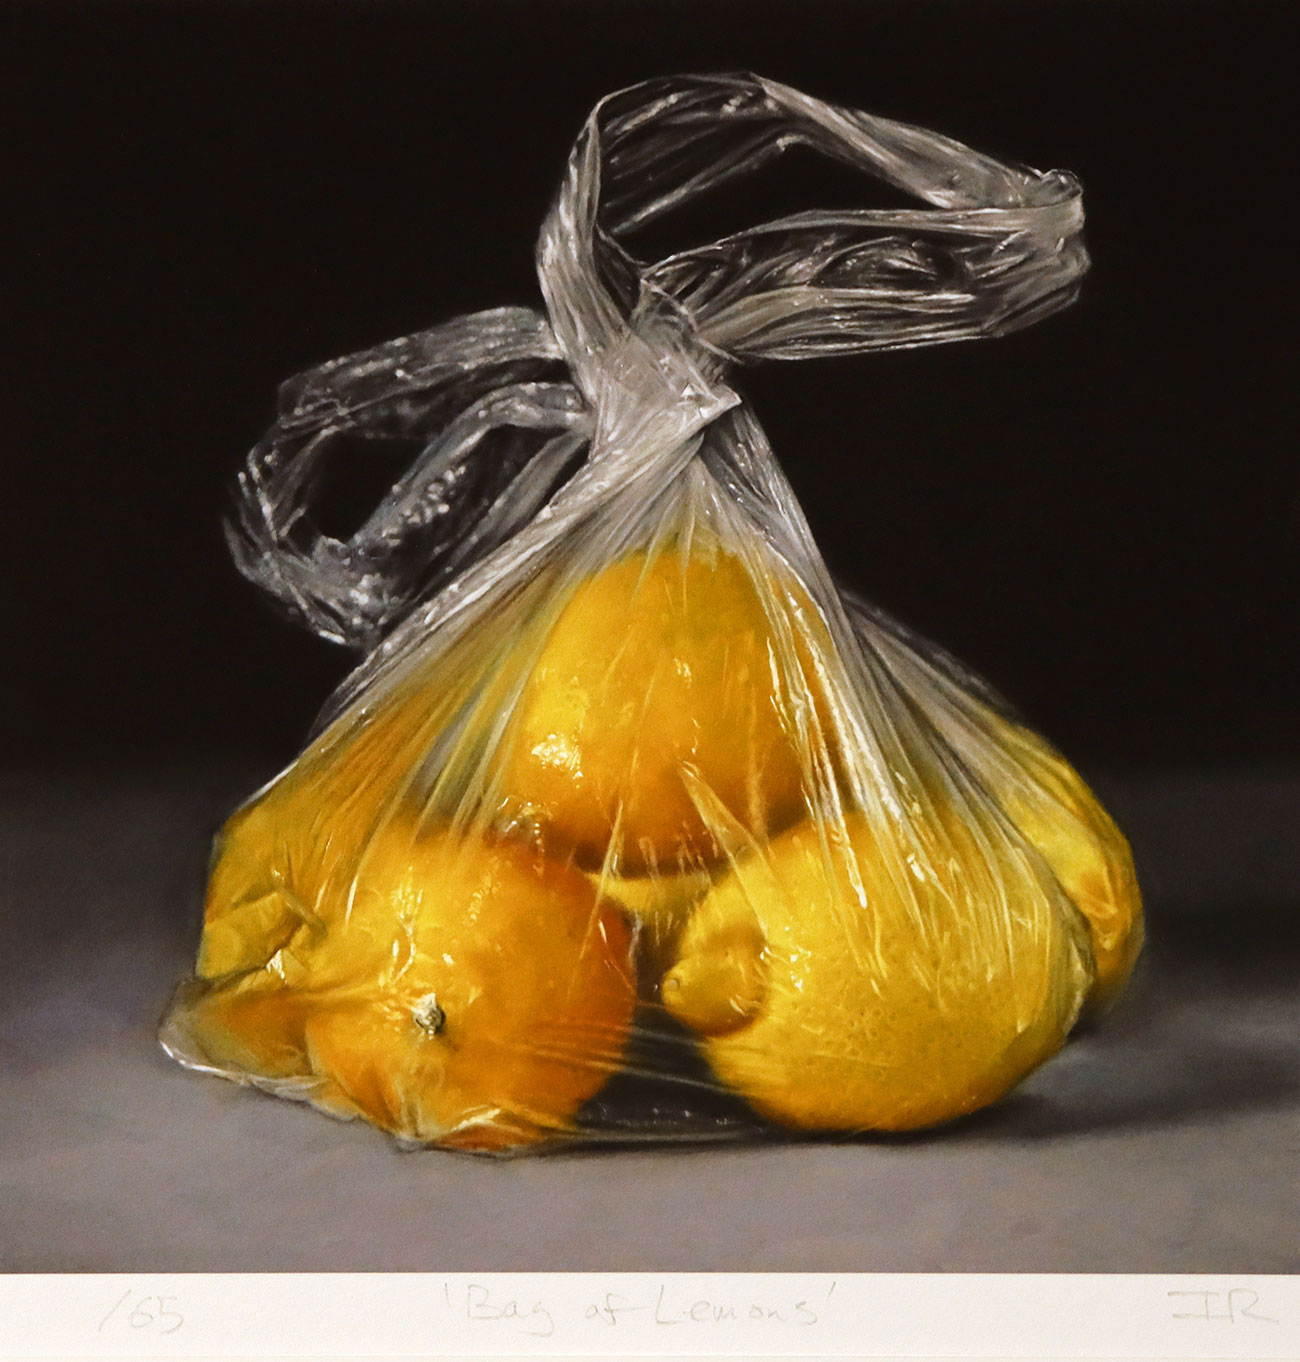 Ian Rawling, Signed limited edition print, Bag of Lemons Click to enlarge